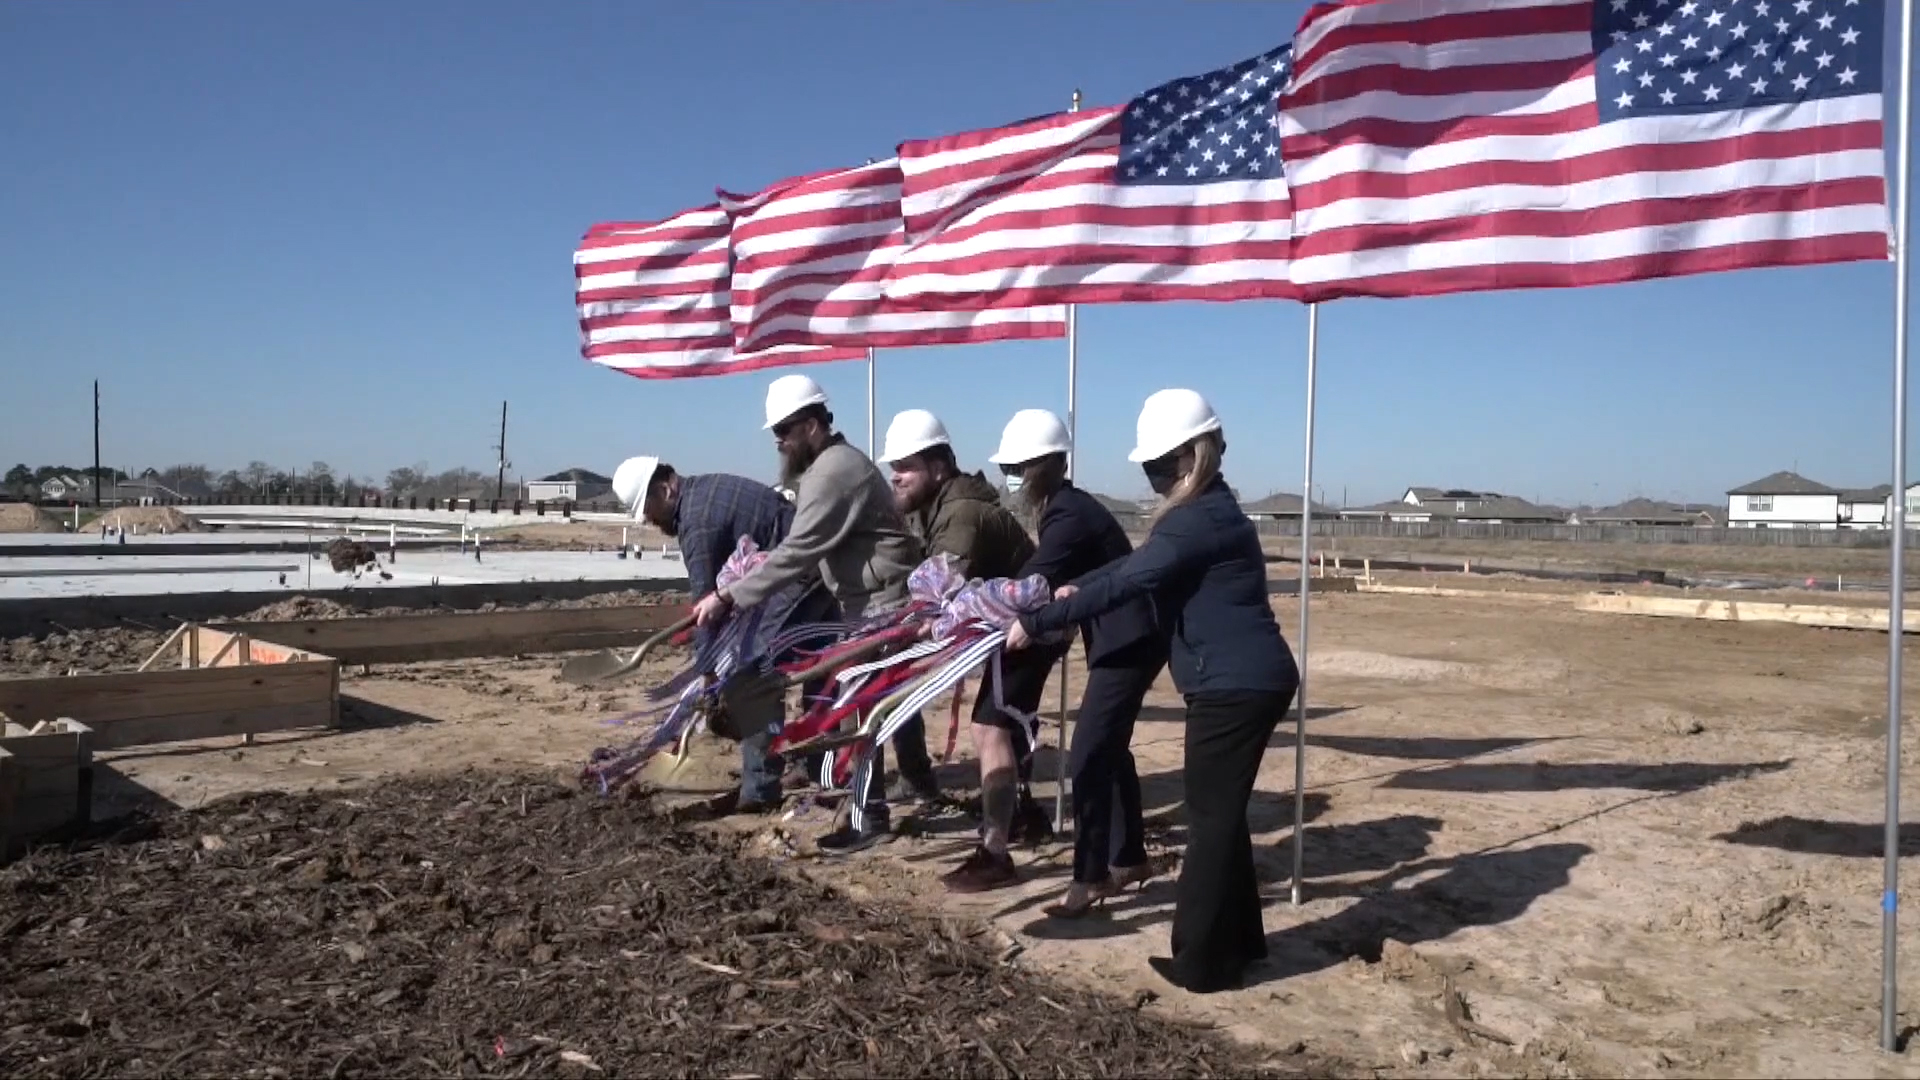 U.S. Army Sergeant James Ford and Army Specialist Kisha Dorsey have broken ground on their brand-new homes, donated by national homebuilder PulteGroup.